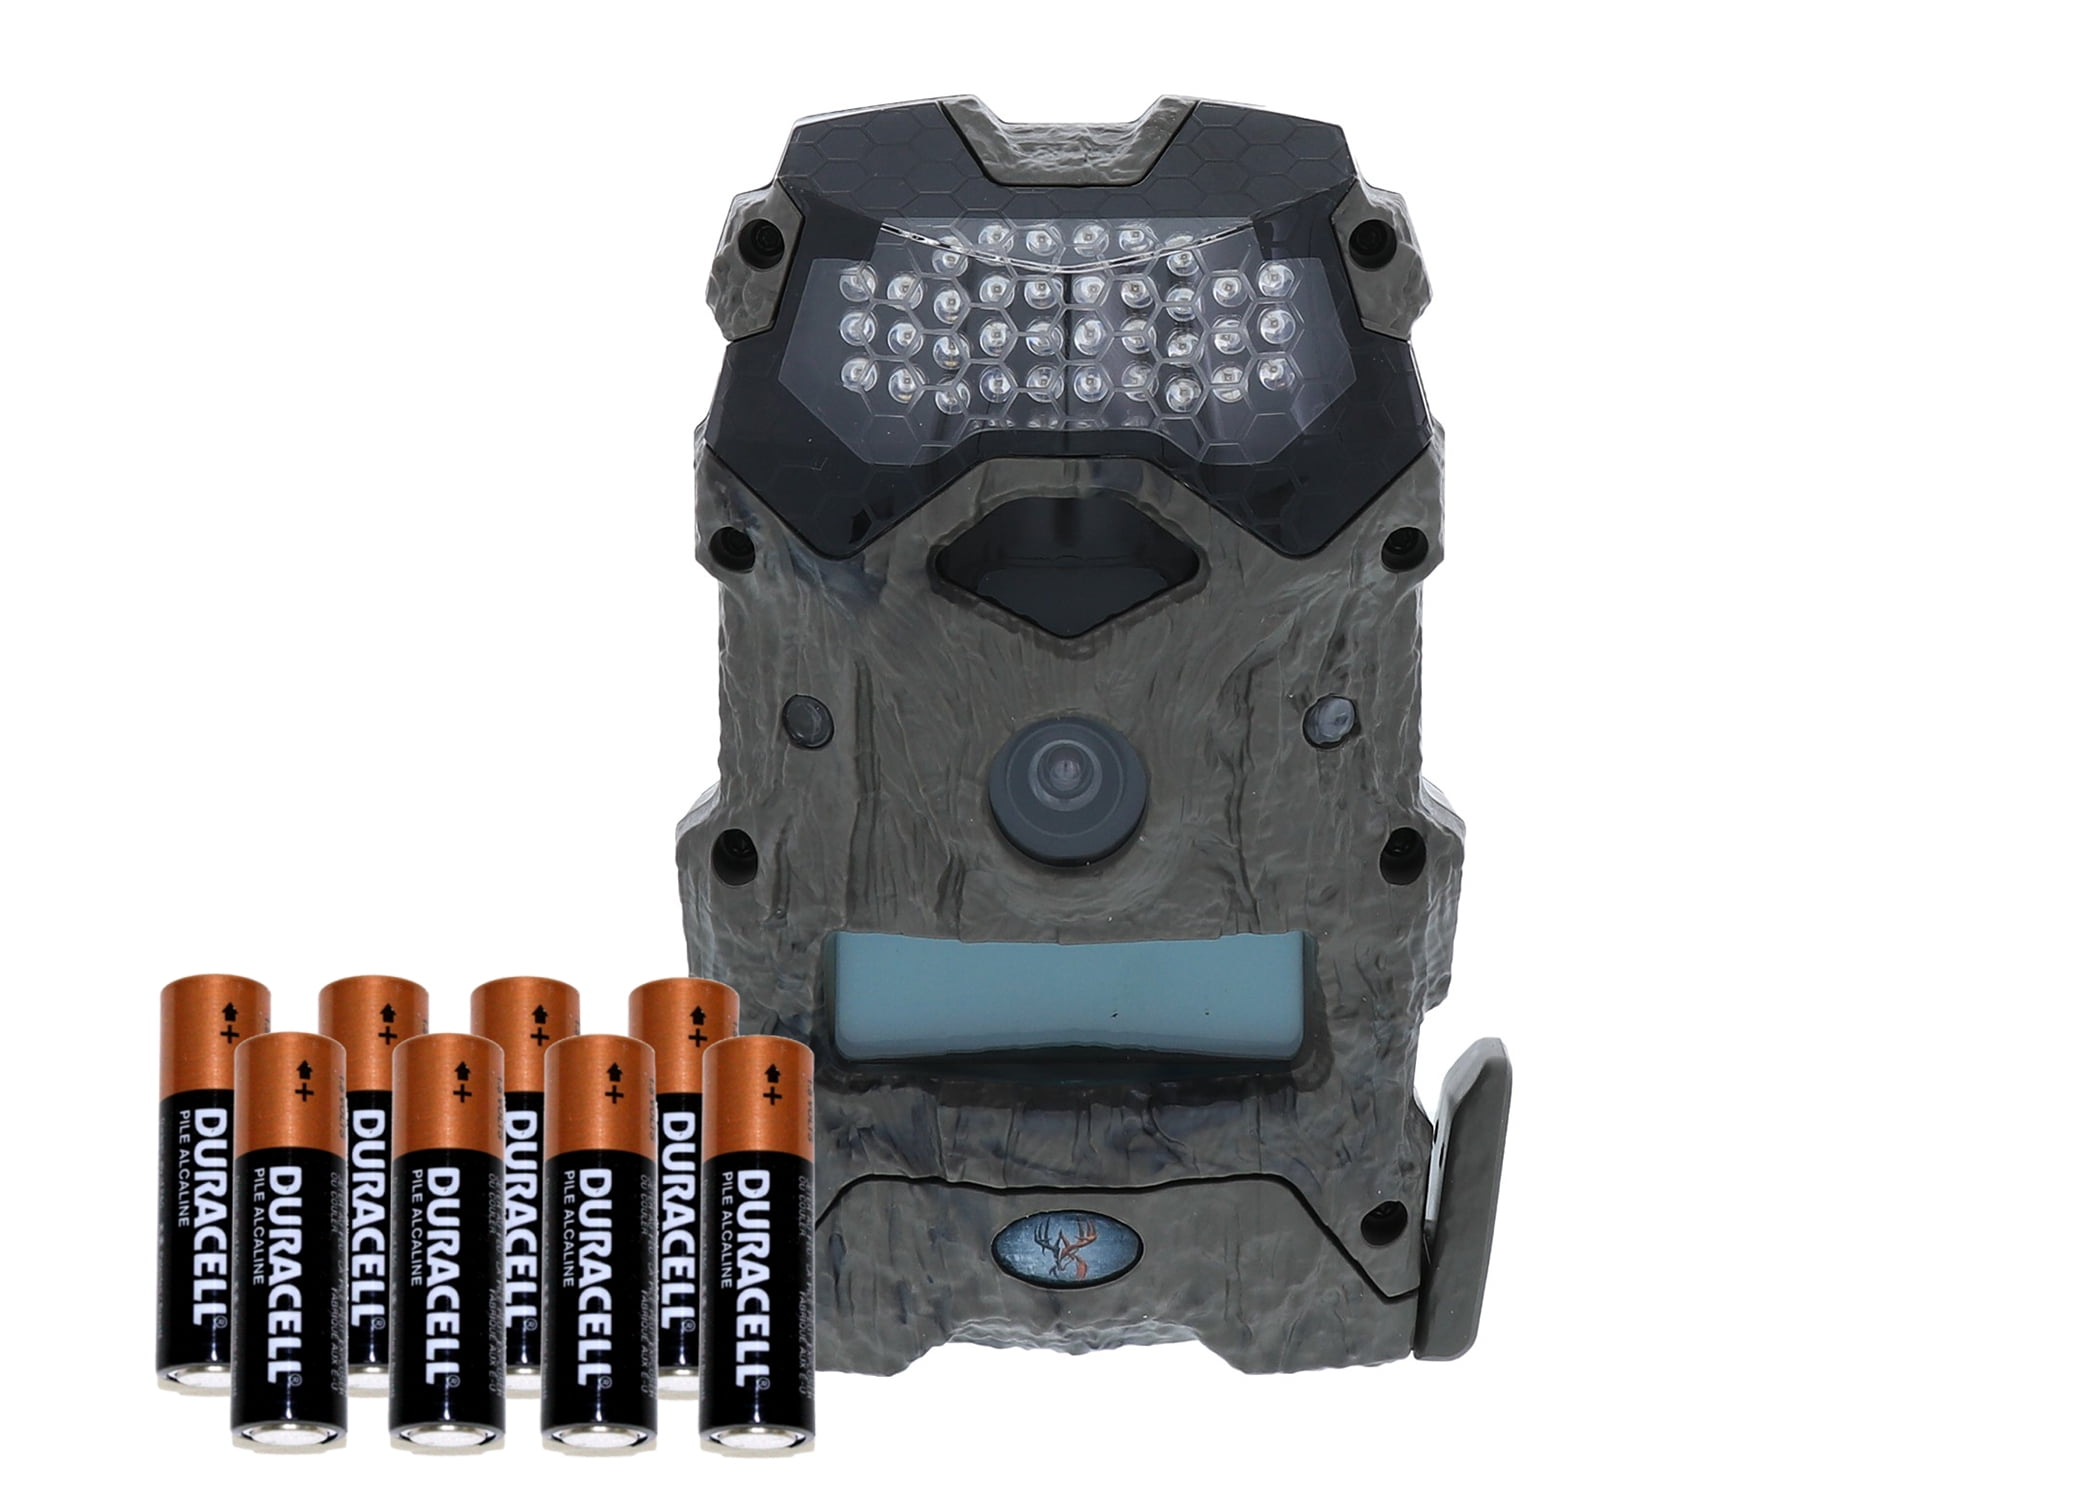 Wildgame Innovations Scrapeline Lightsout Trail Game Deer Camera Package 16mp 